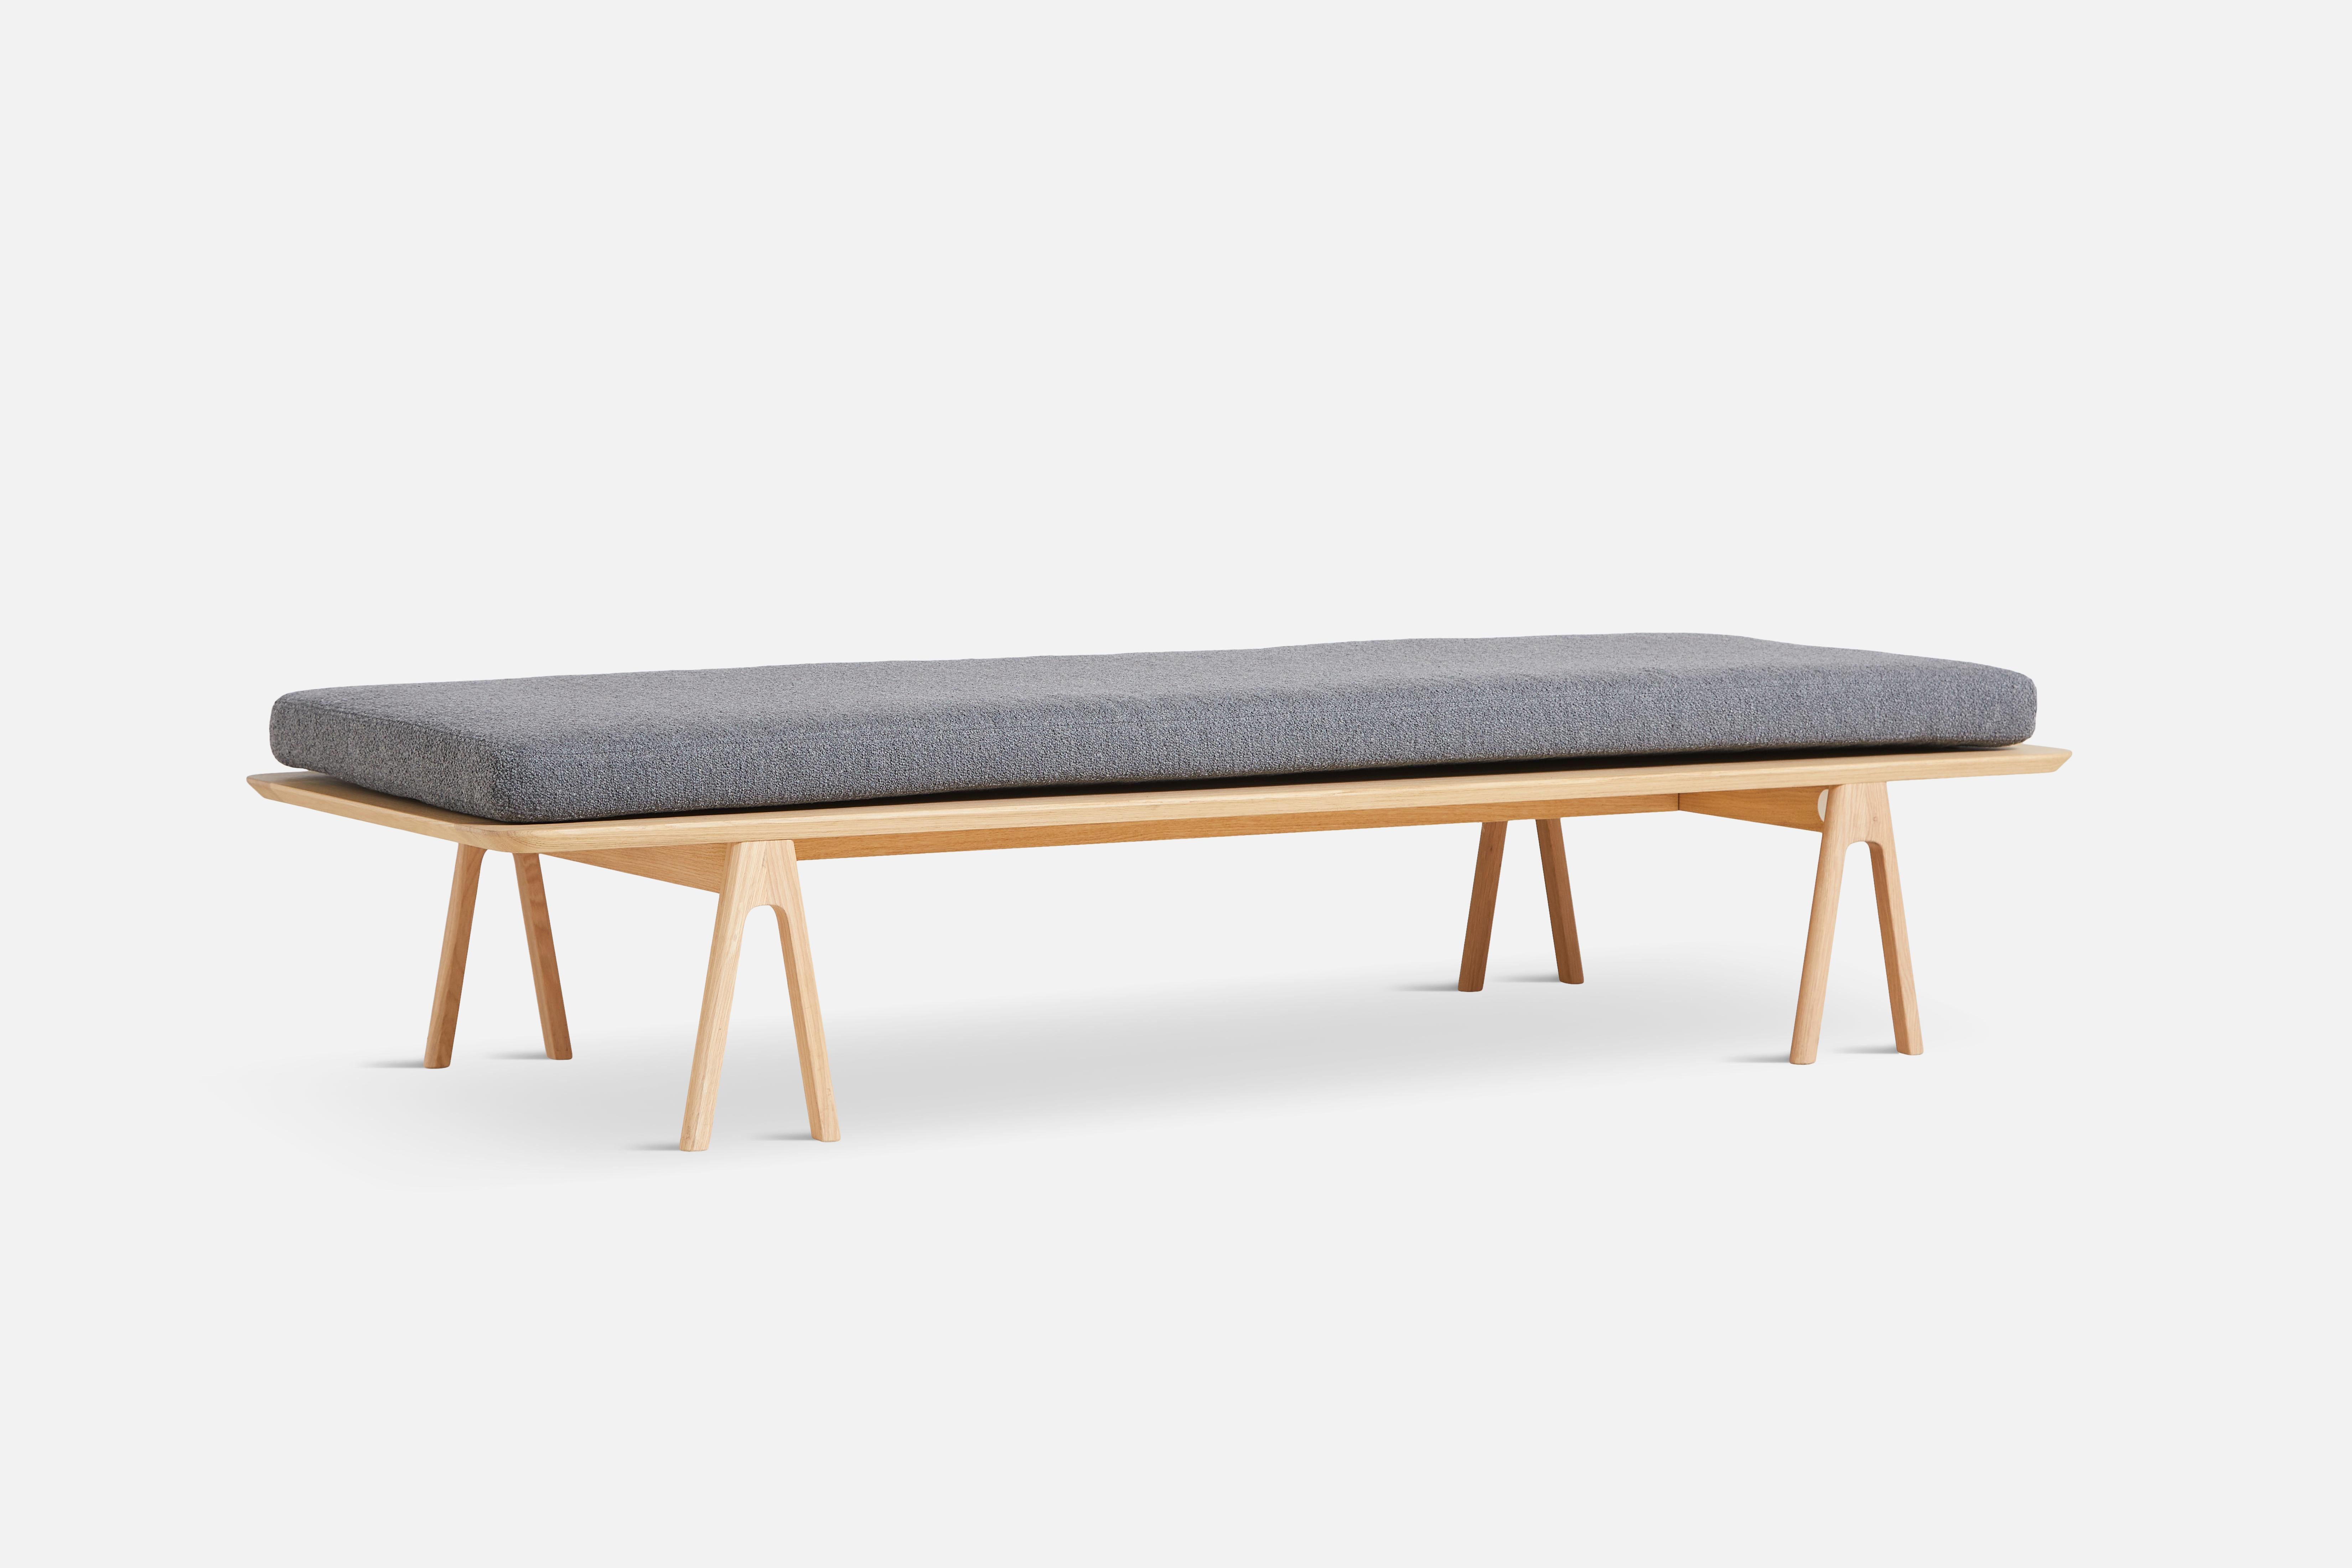 Grey oak level daybed by Msds studio.
Materials: foam, oak, non slip fabric.
Dimensions: D 76.5 x W 190 x H 41 cm
Also available in different colours.

The founders, Mia and Torben Koed, decided to put their 30 years of experience into a new